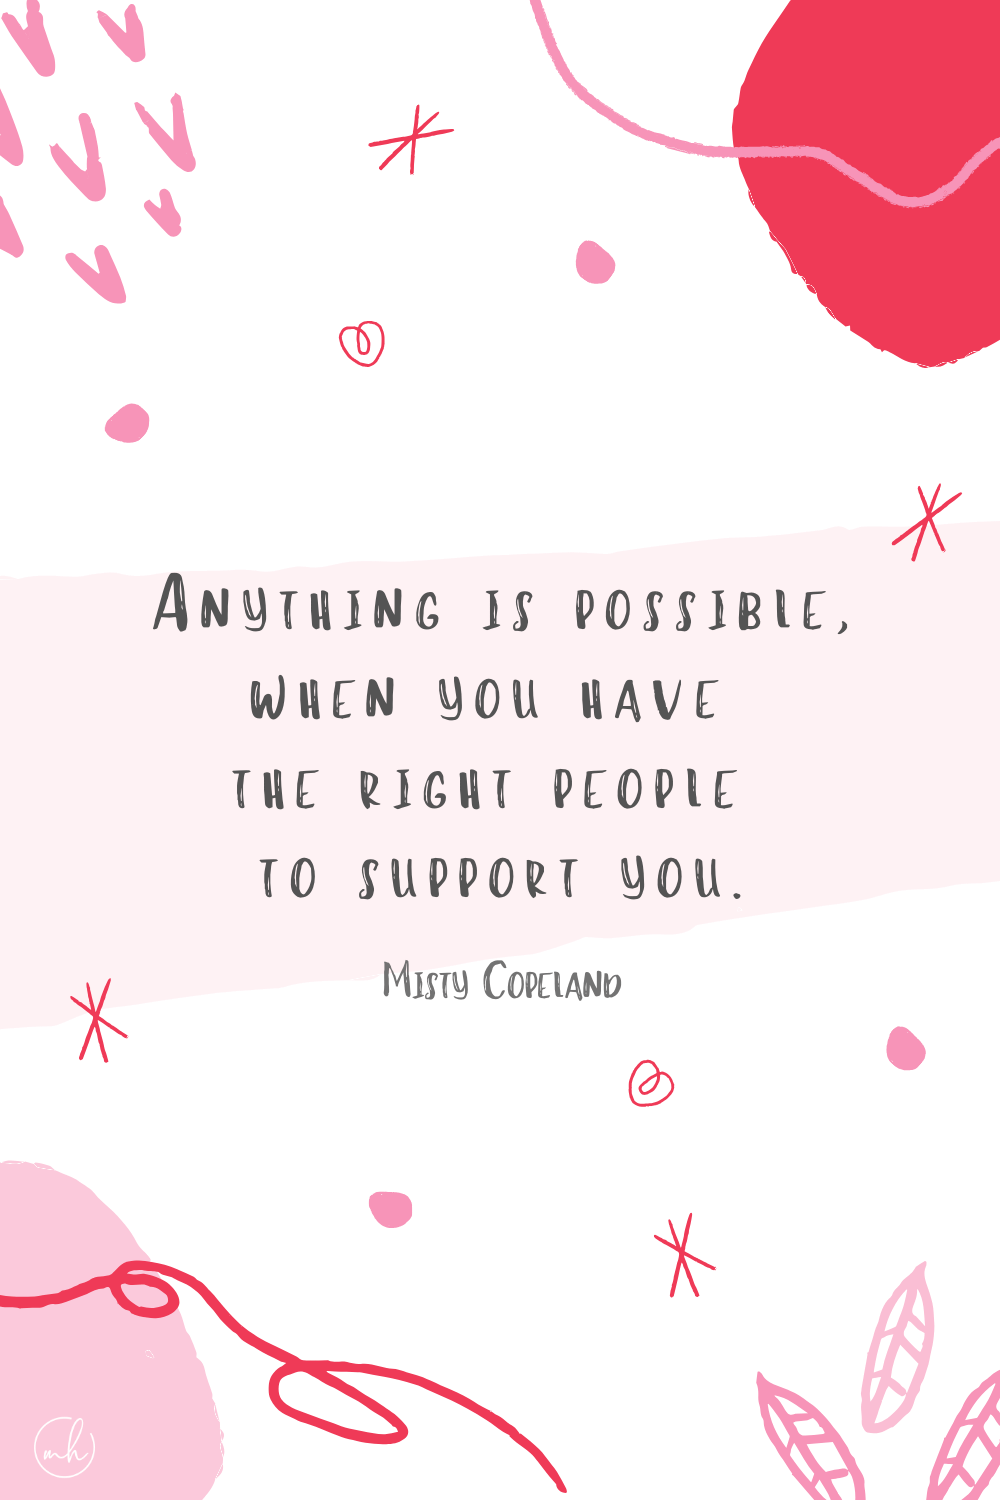 "Anything is possible when you have the right people there to support you." - Misty Copeland